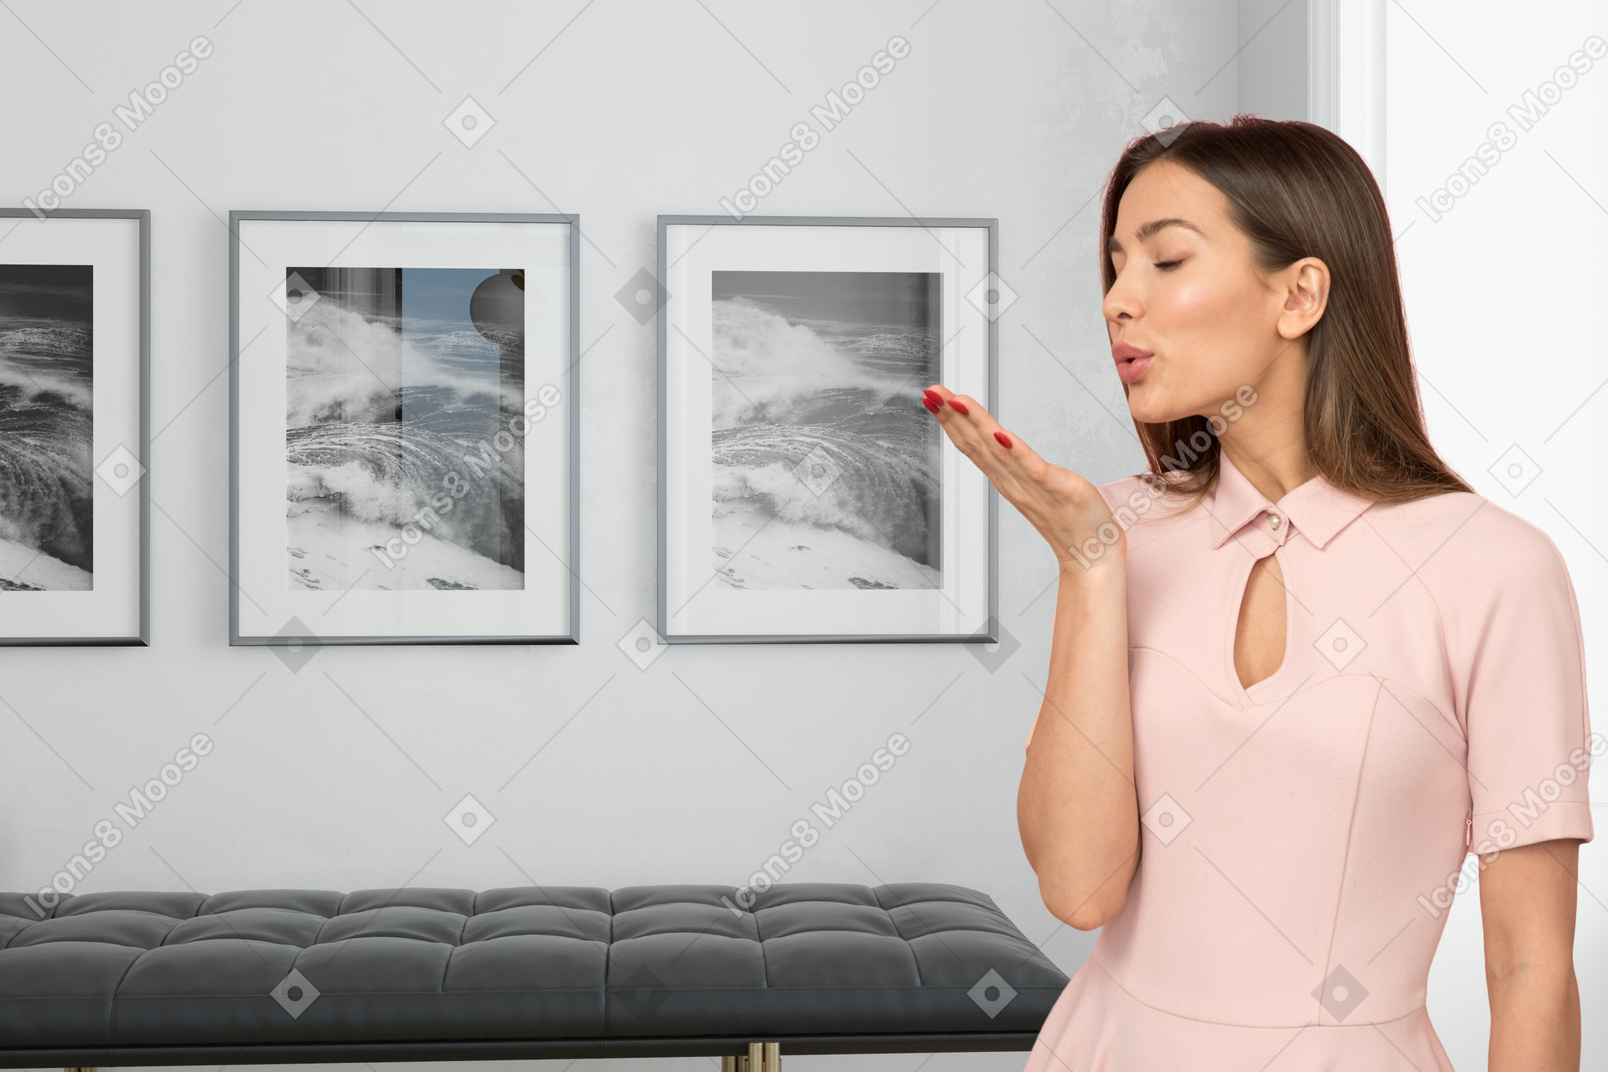 A woman in a pink dress blowing a kiss